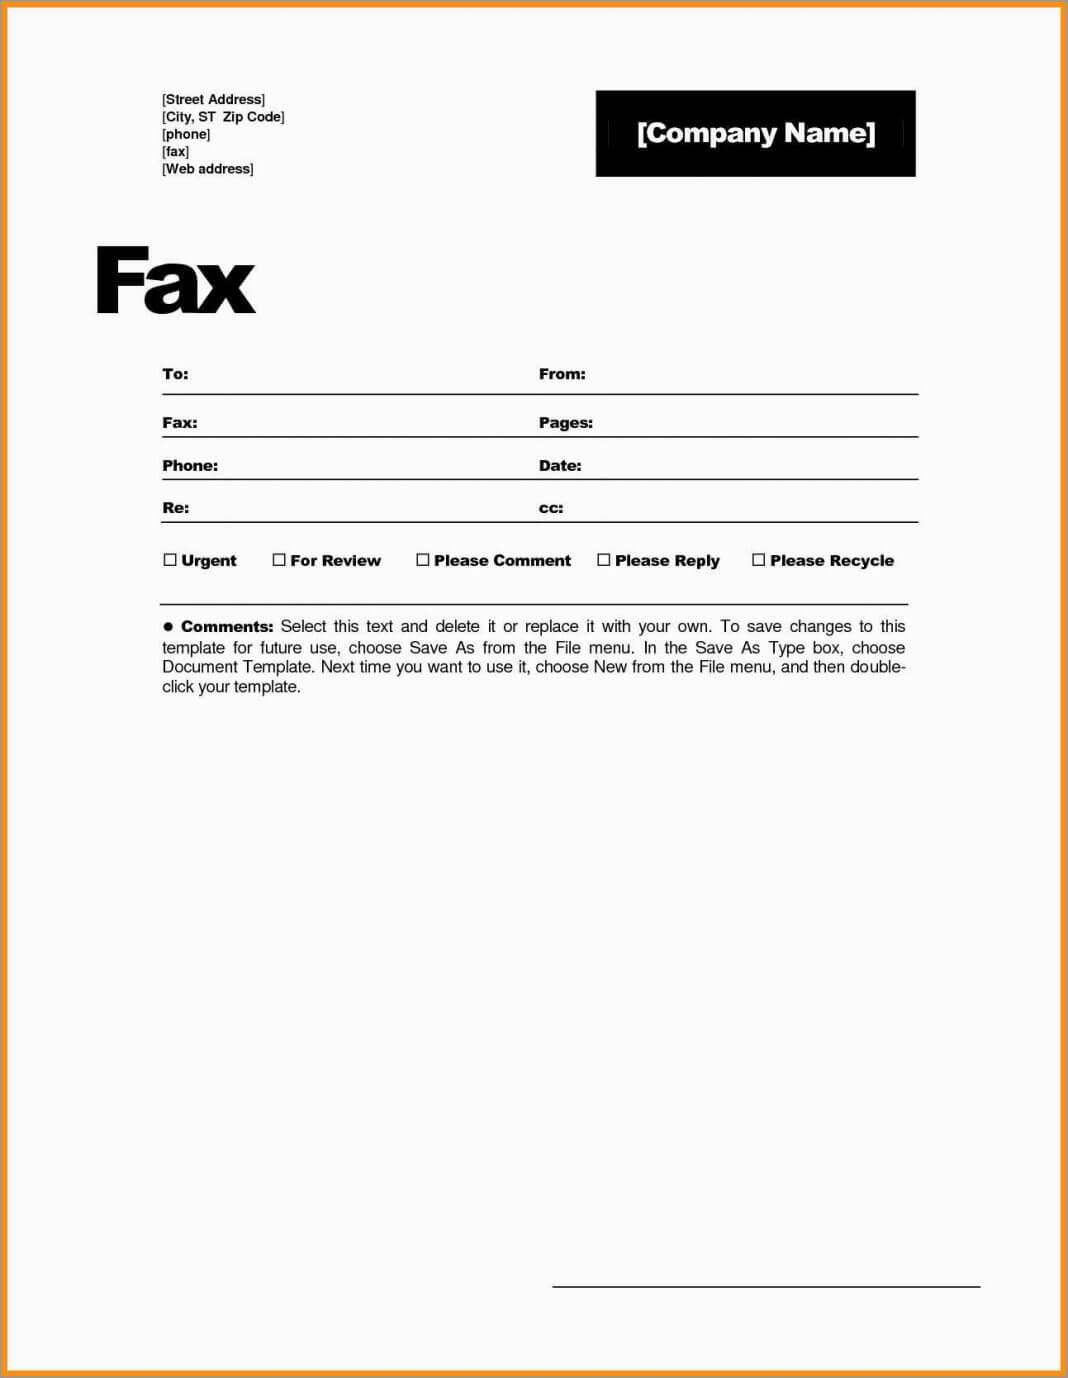 Fax Cover Sheet Template Word Spreadsheet Examples Printable For Fax Cover Sheet Template Word 2010